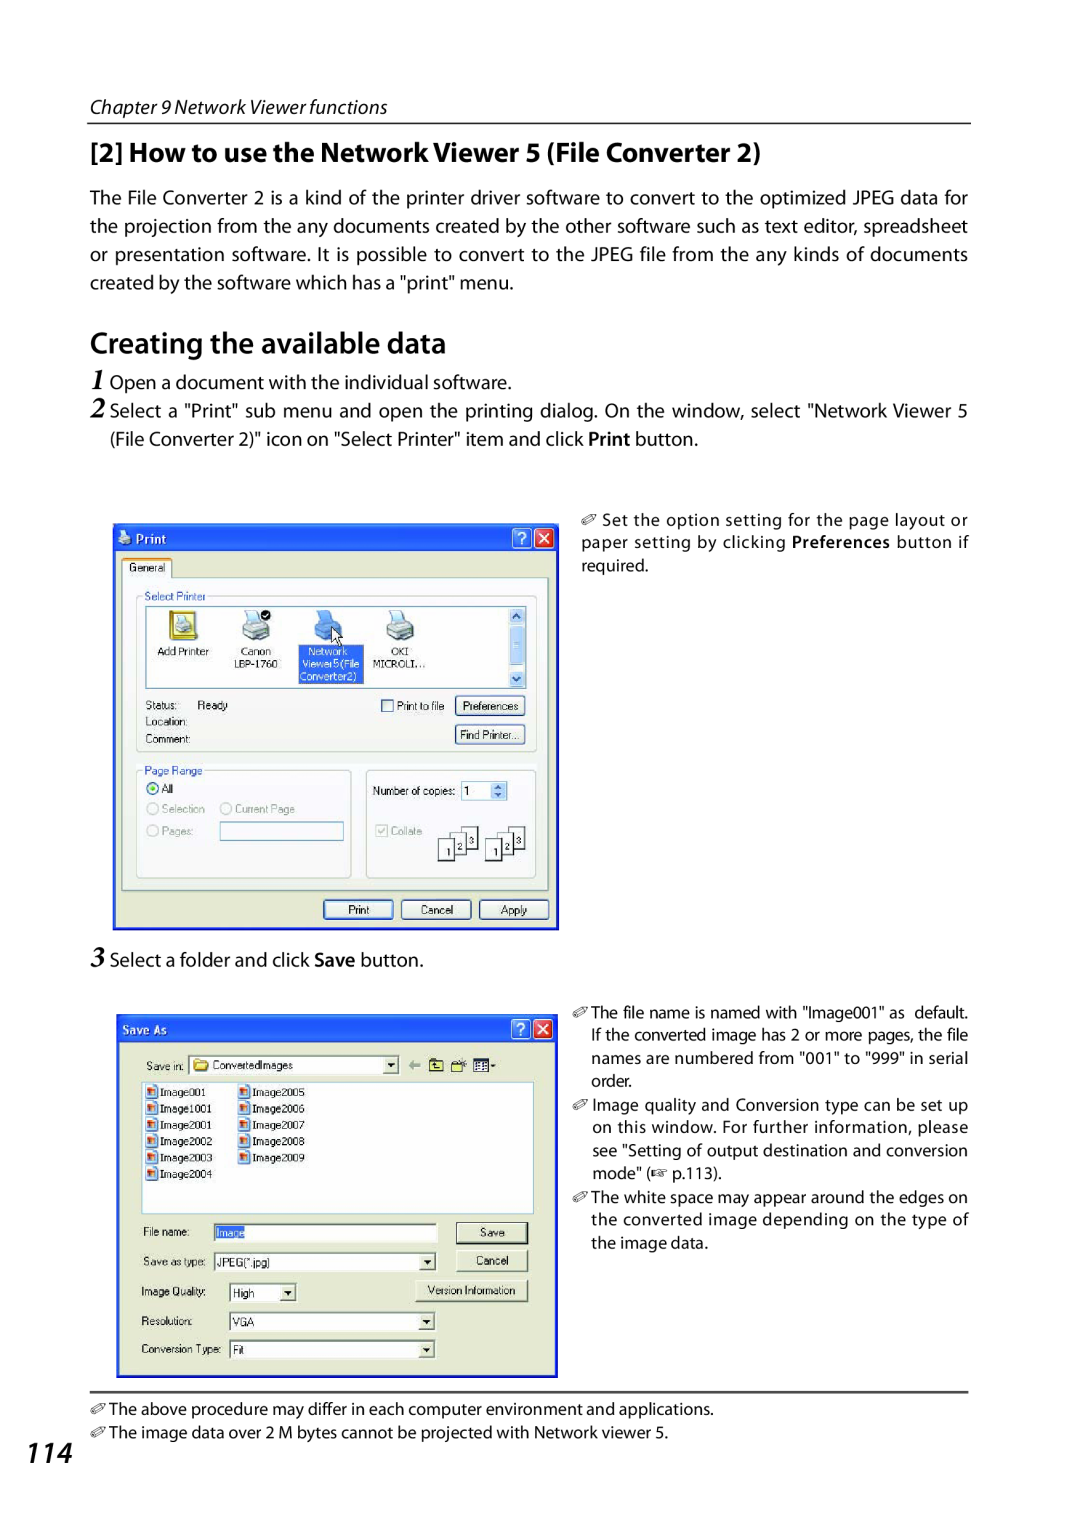 Sanyo SO-WIN-KF3AC How to use the Network Viewer 5 File Converter, Creating the available data, Network Viewer functions 